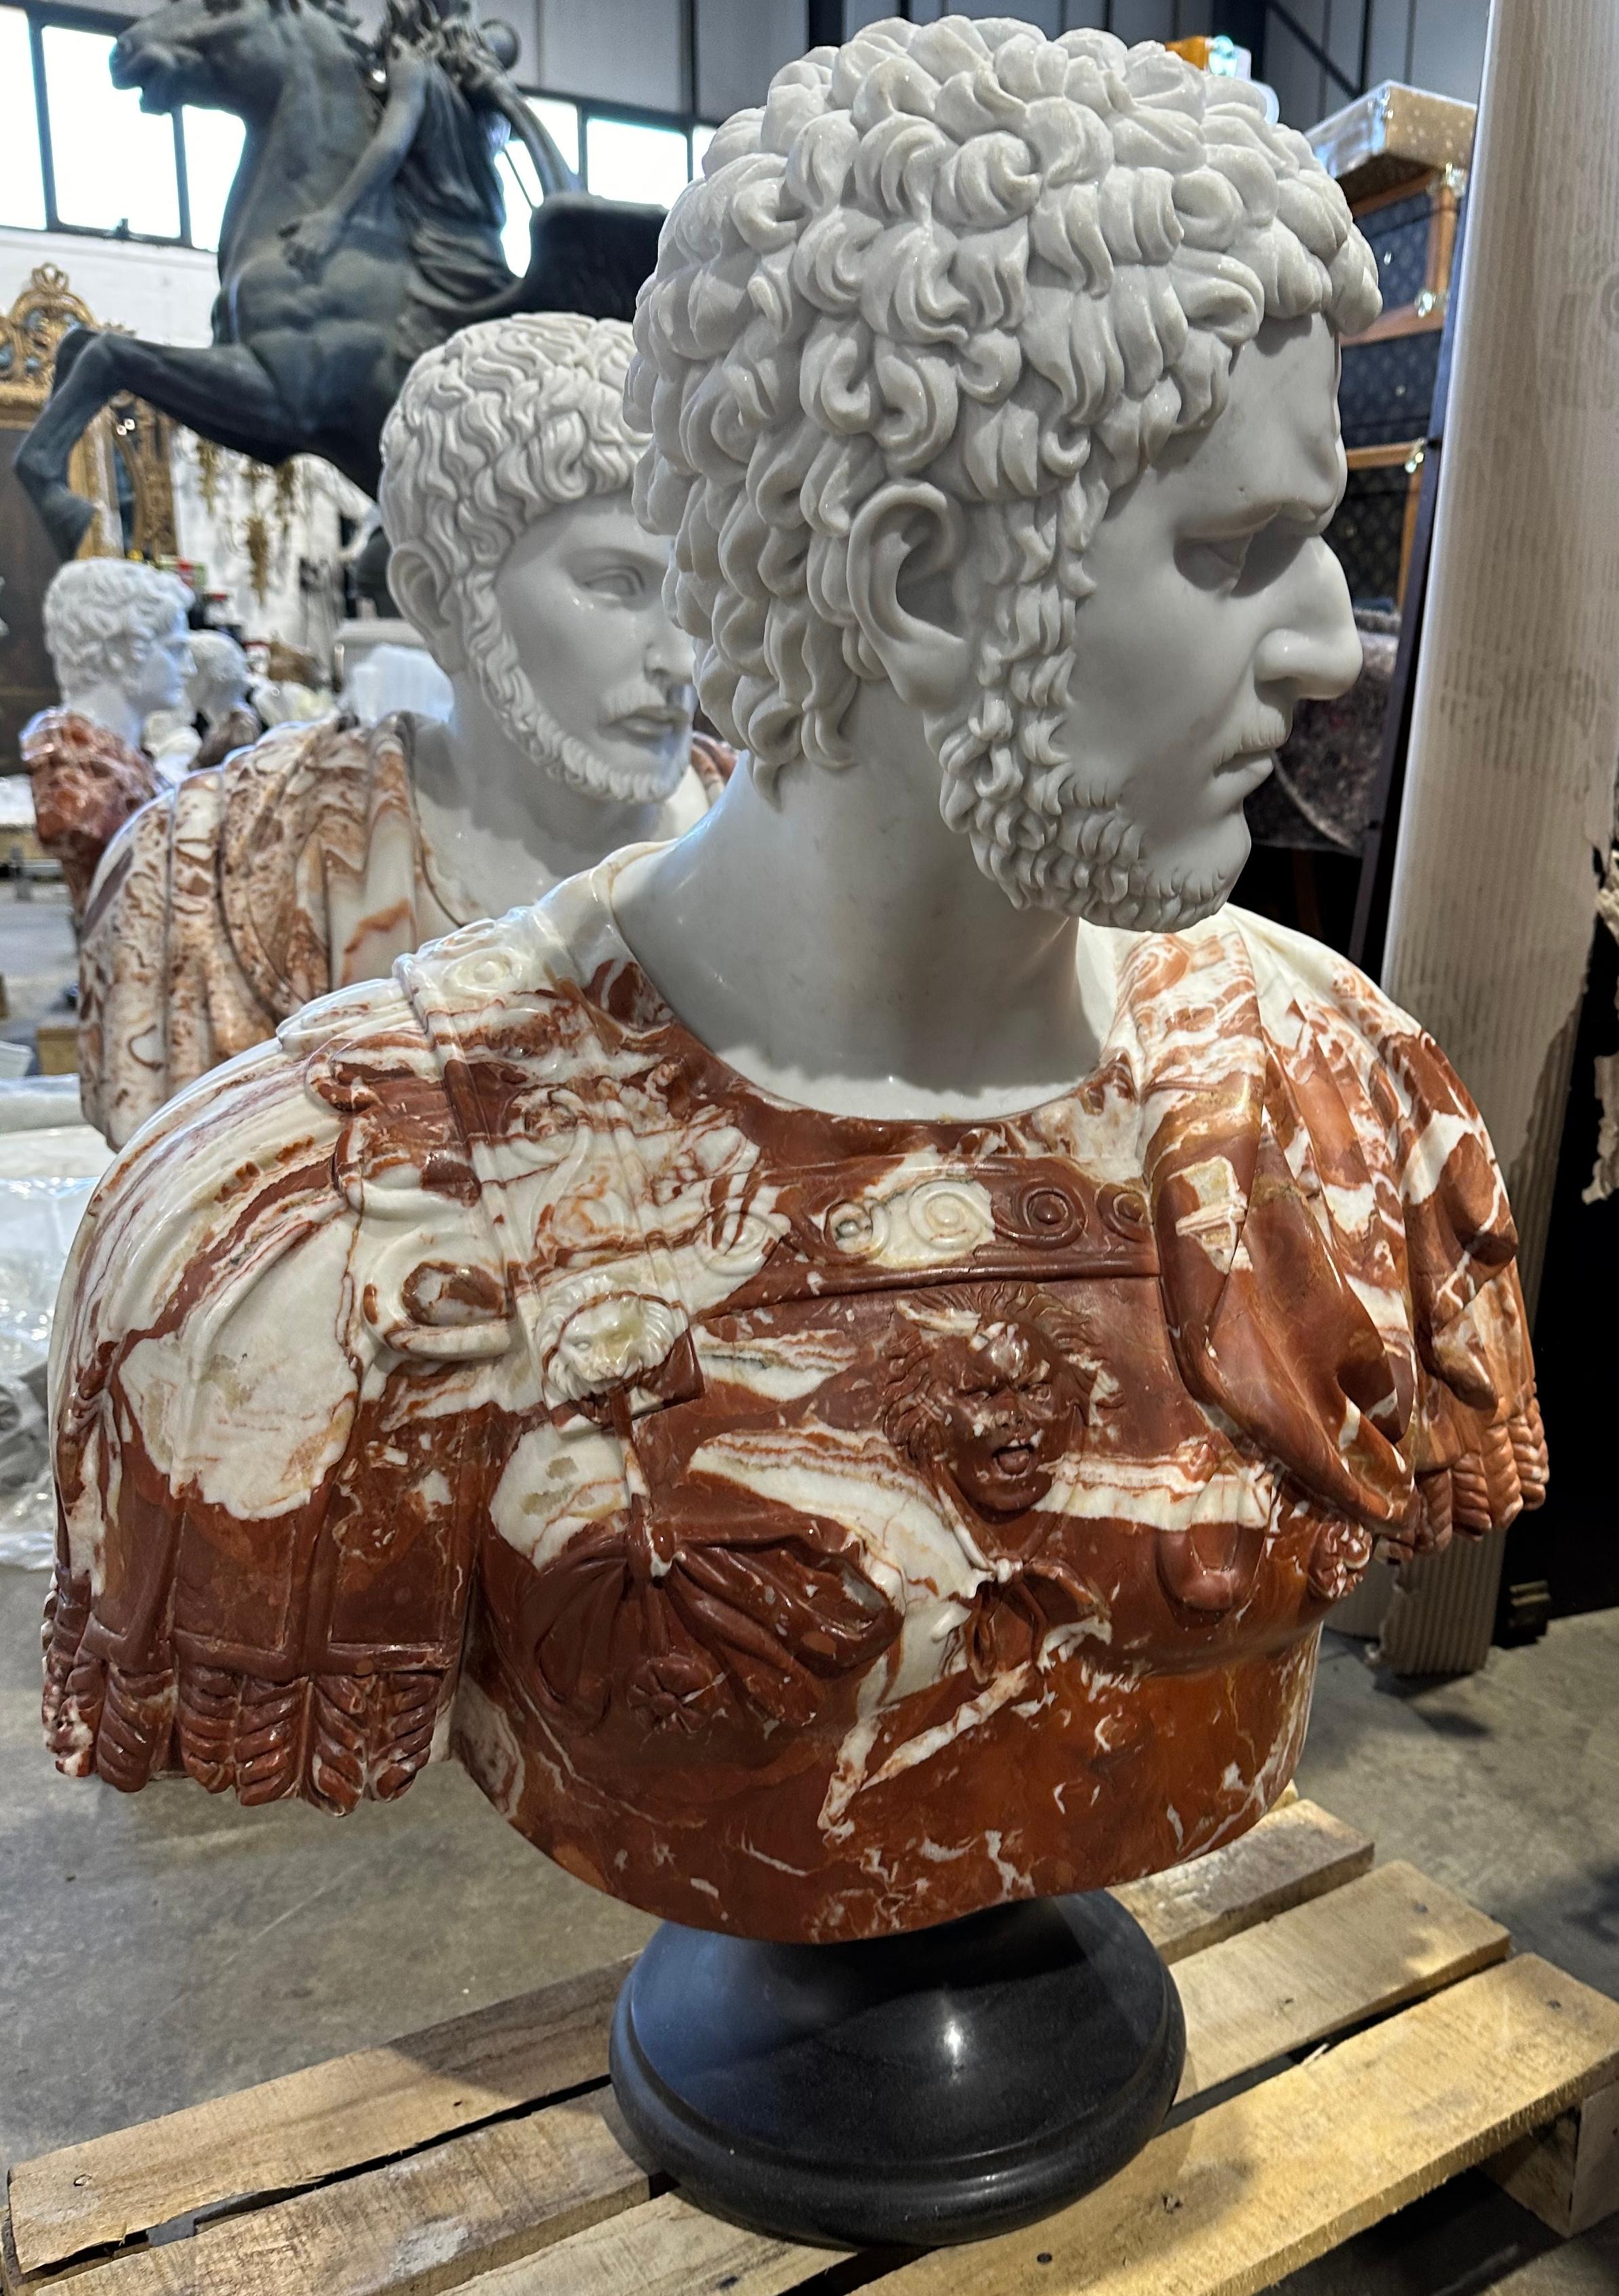 A highly decorative two coloured red and white marble Classical style bust on a black stand. Skilfully carved with clear features, curled hair and beard. The drapery of the garments hangs realistically and has lovely detailing to the edges. The